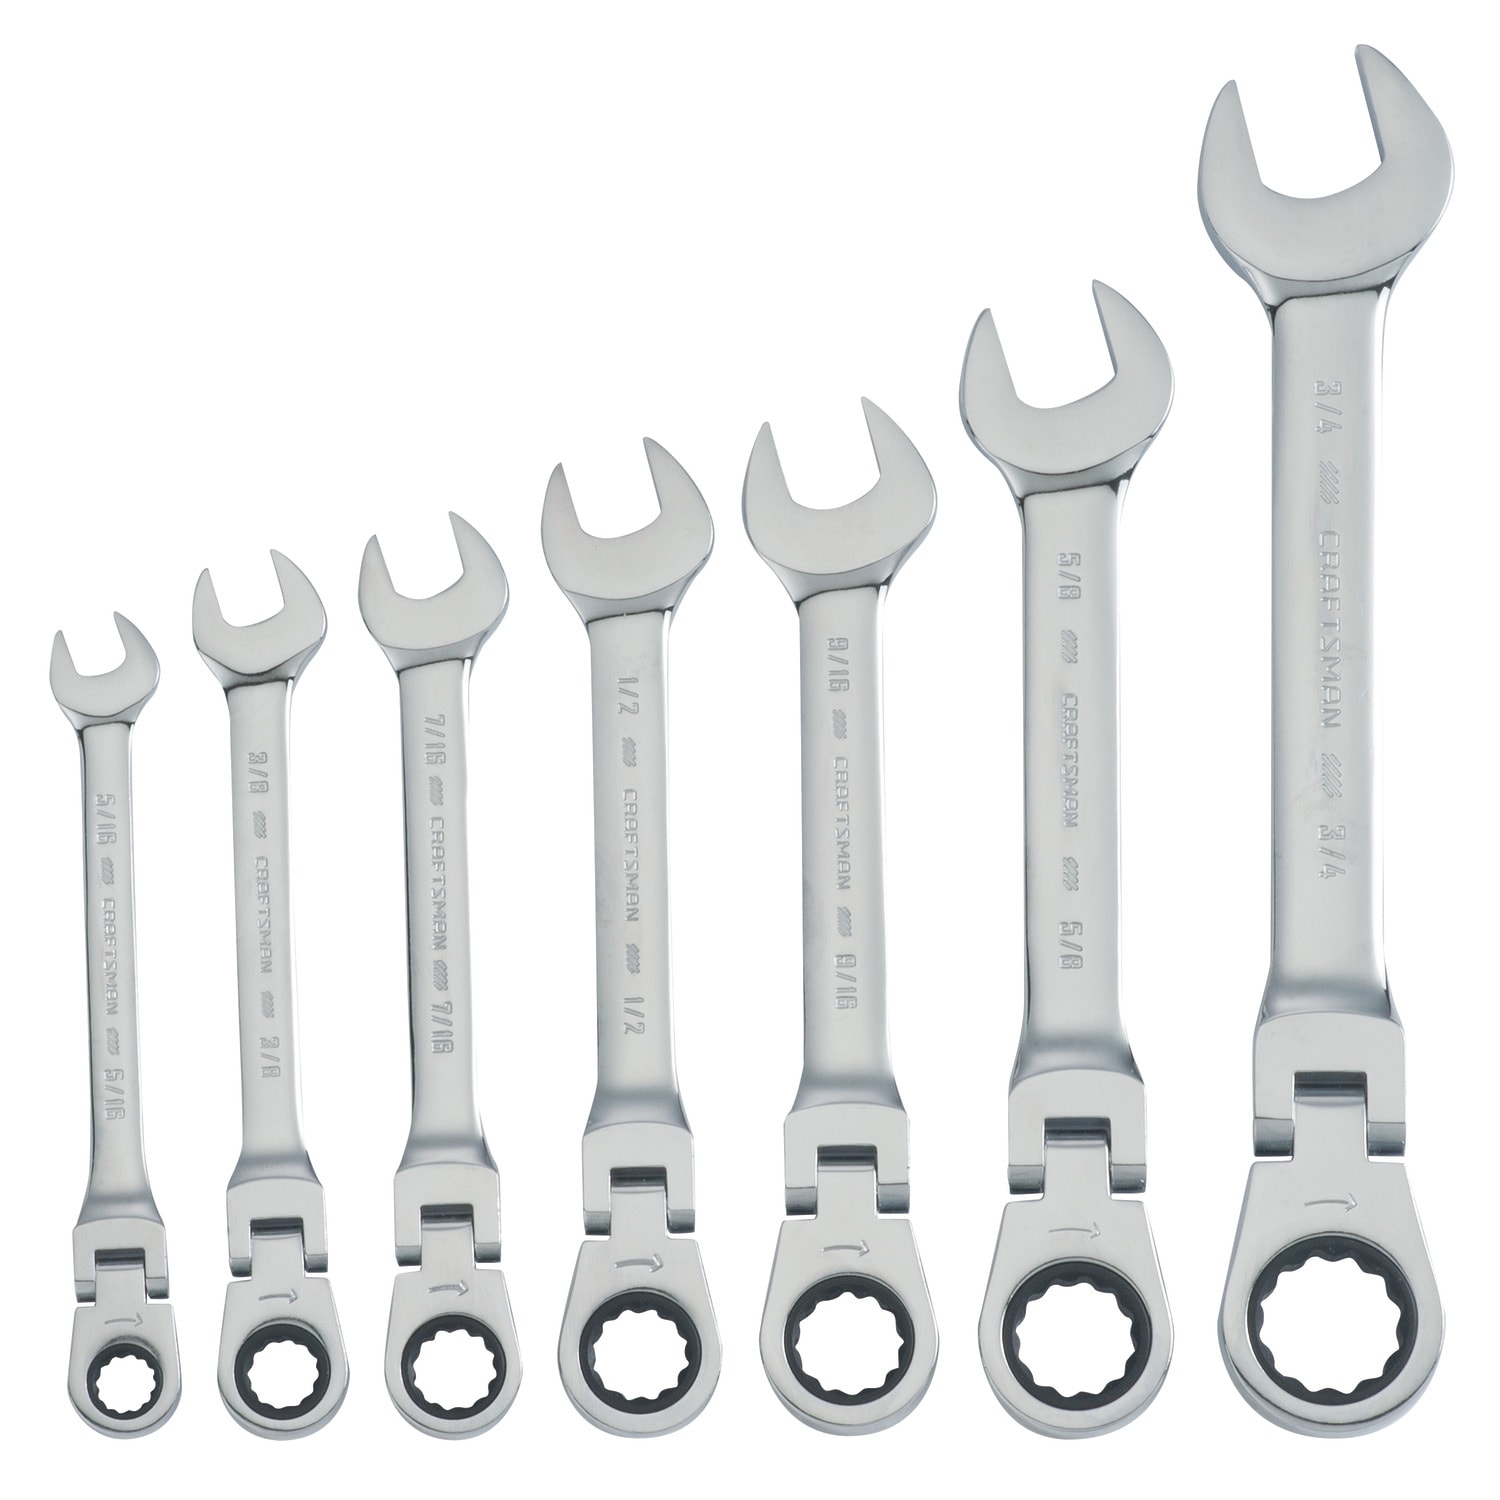 Ratcheting Box Wrench Head Size 15x17mm